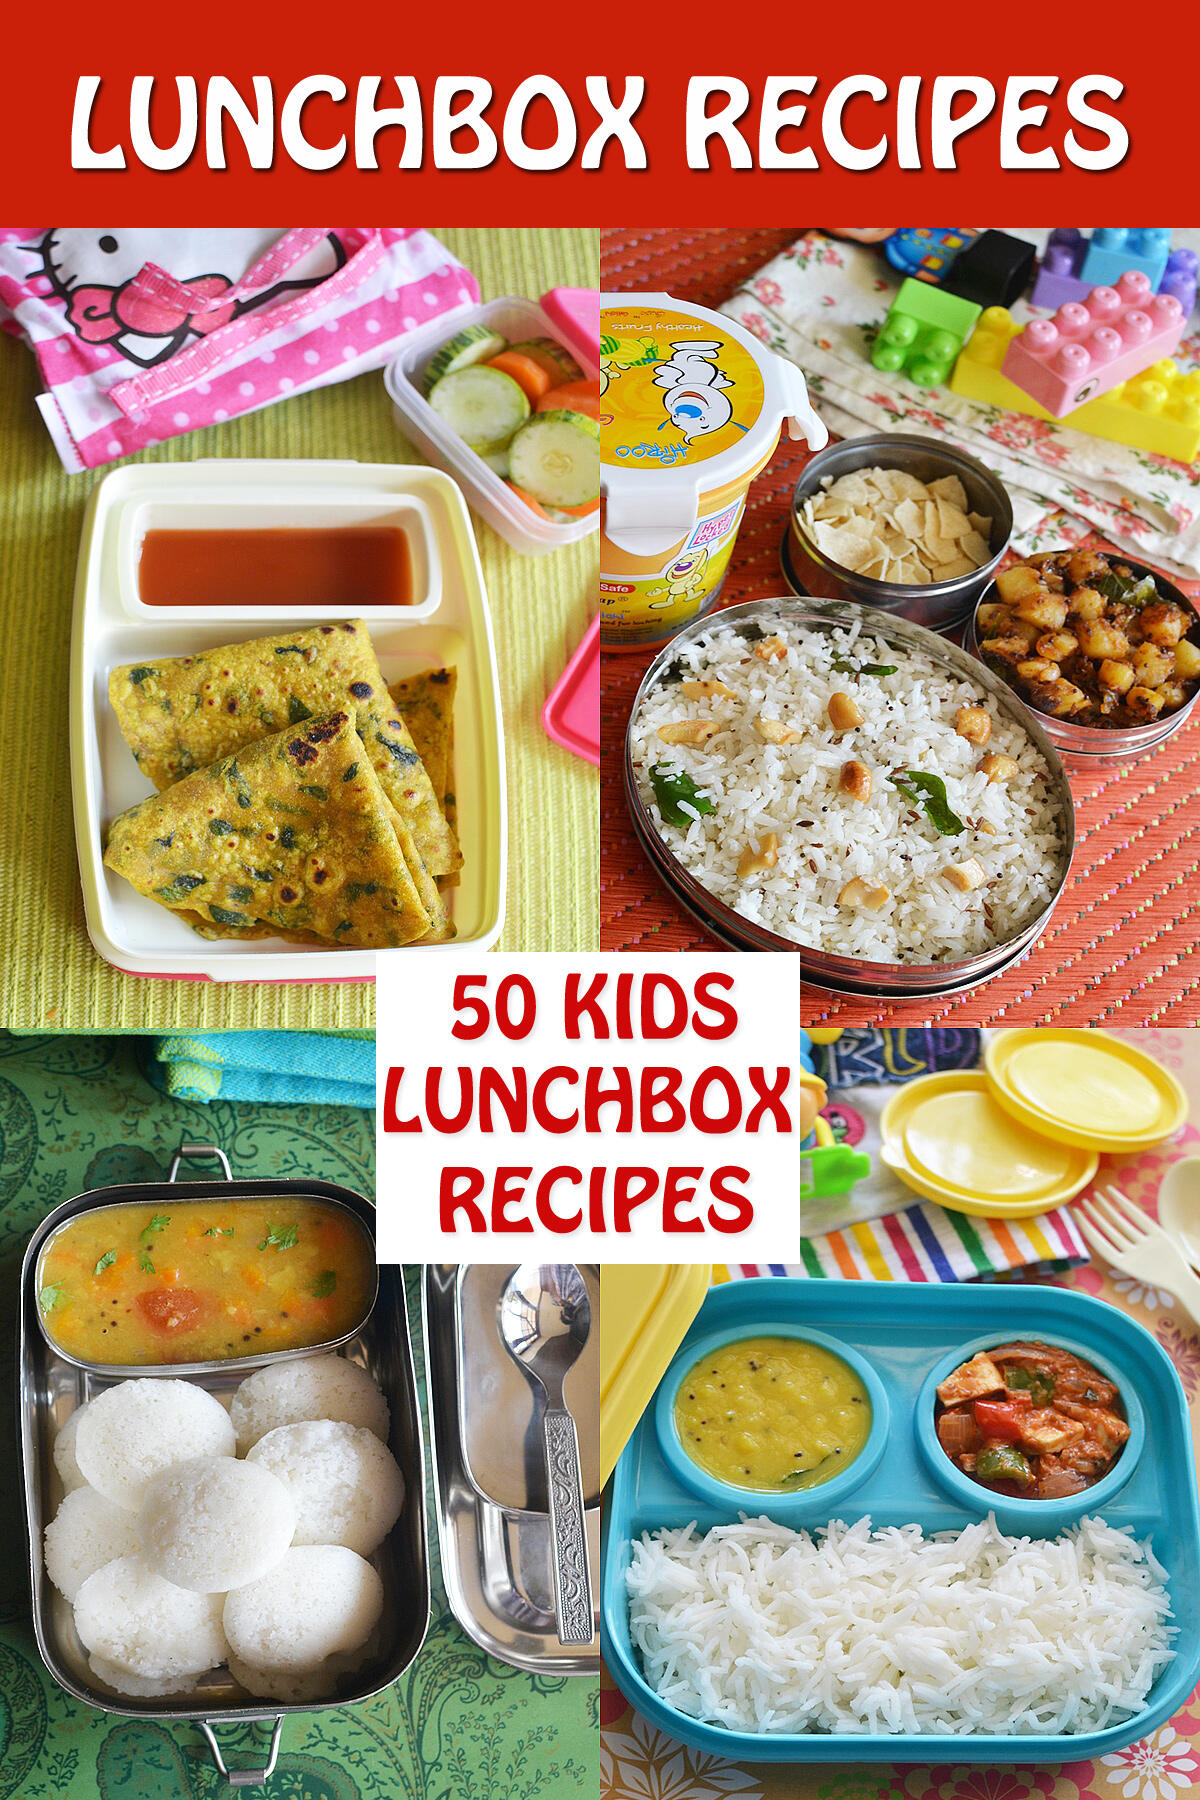 Monday to Friday 5 Power packed Lunch box Recipes for Adults - My Tasty  Curry